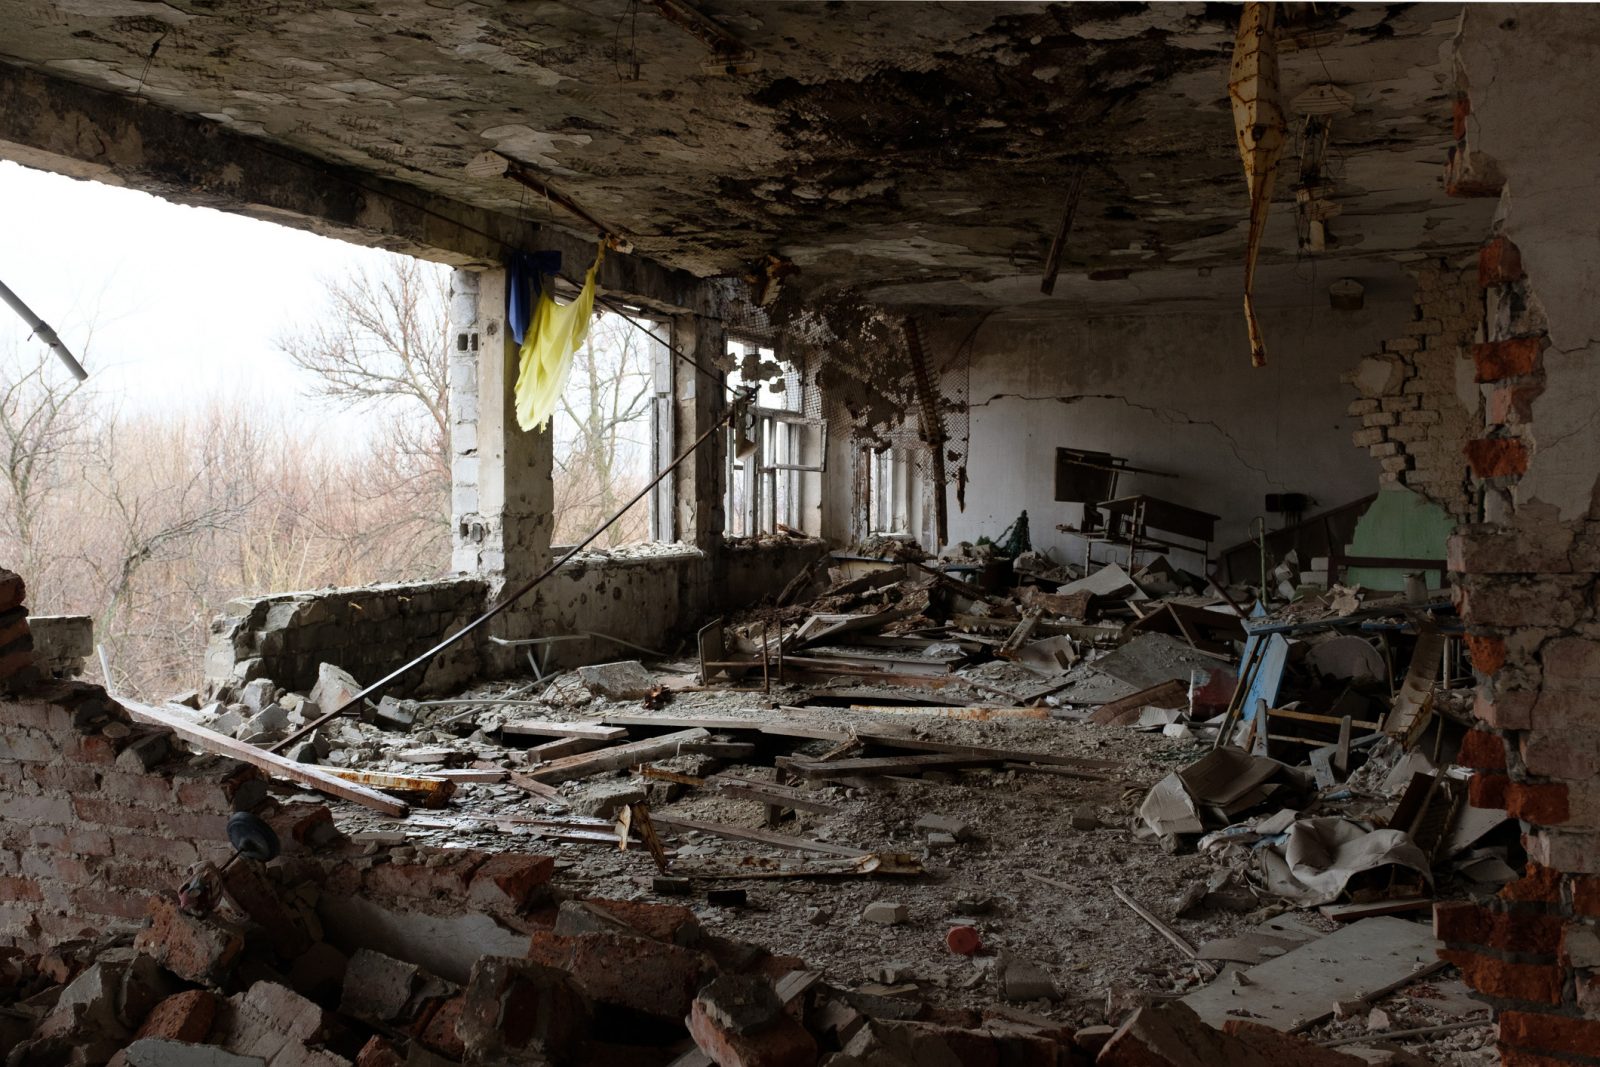 The inside view of the remains of a building that was bombed, with blackened debris hanging from the ceiling and chunks of wood and concrete scattered across the floor.